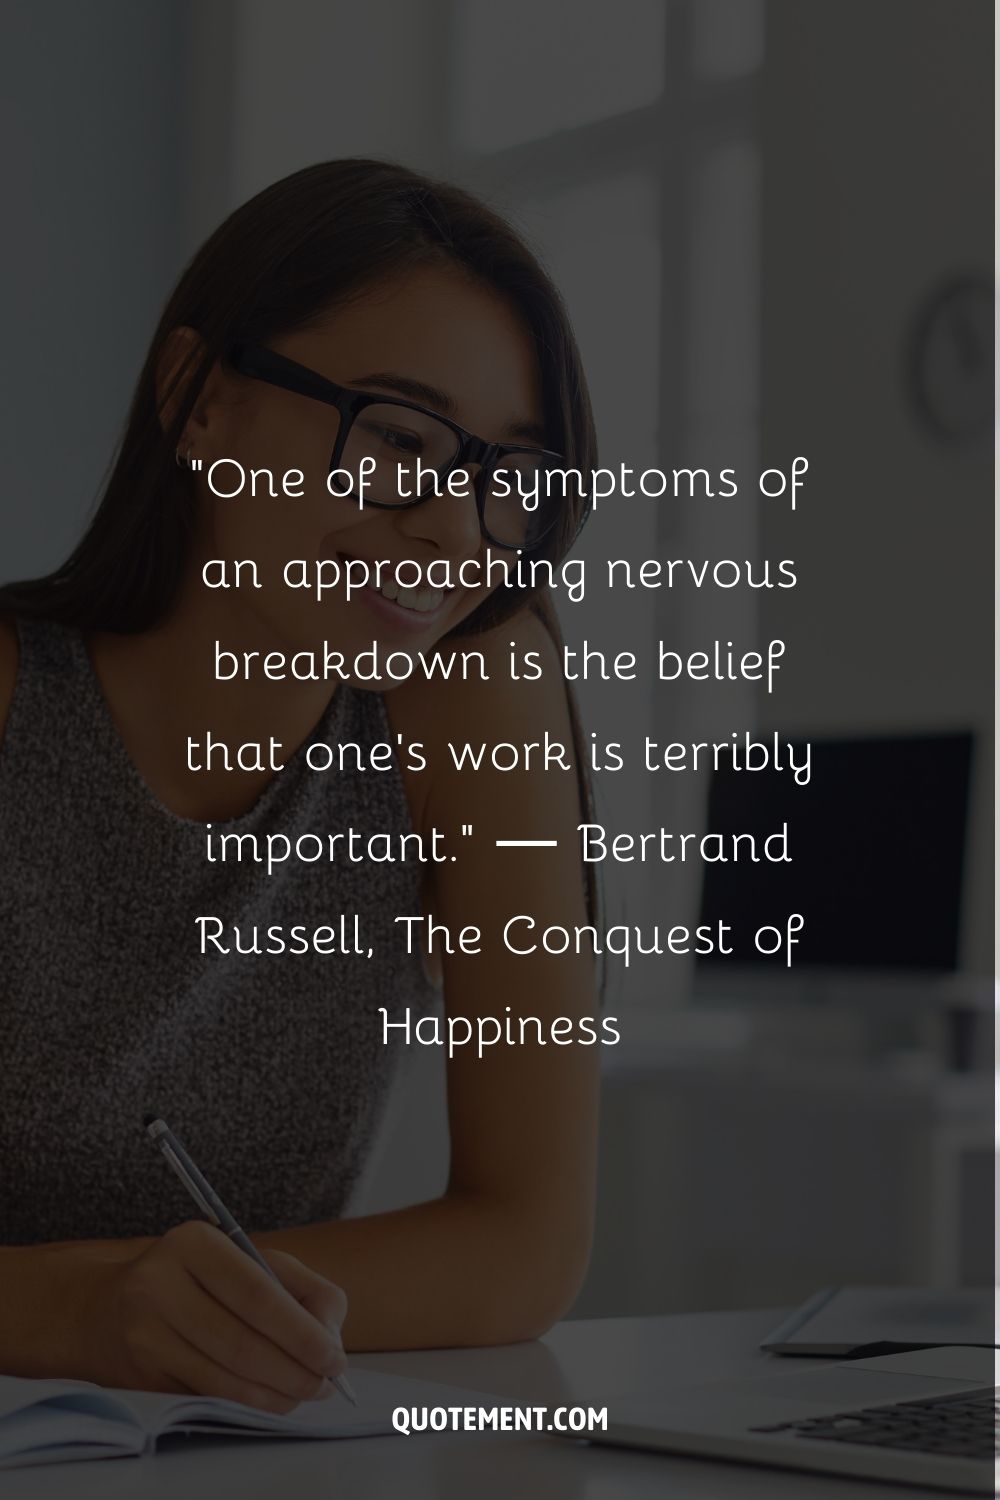 “One of the symptoms of an approaching nervous breakdown is the belief that one’s work is terribly important.” ― Bertrand Russell, The Conquest of Happiness